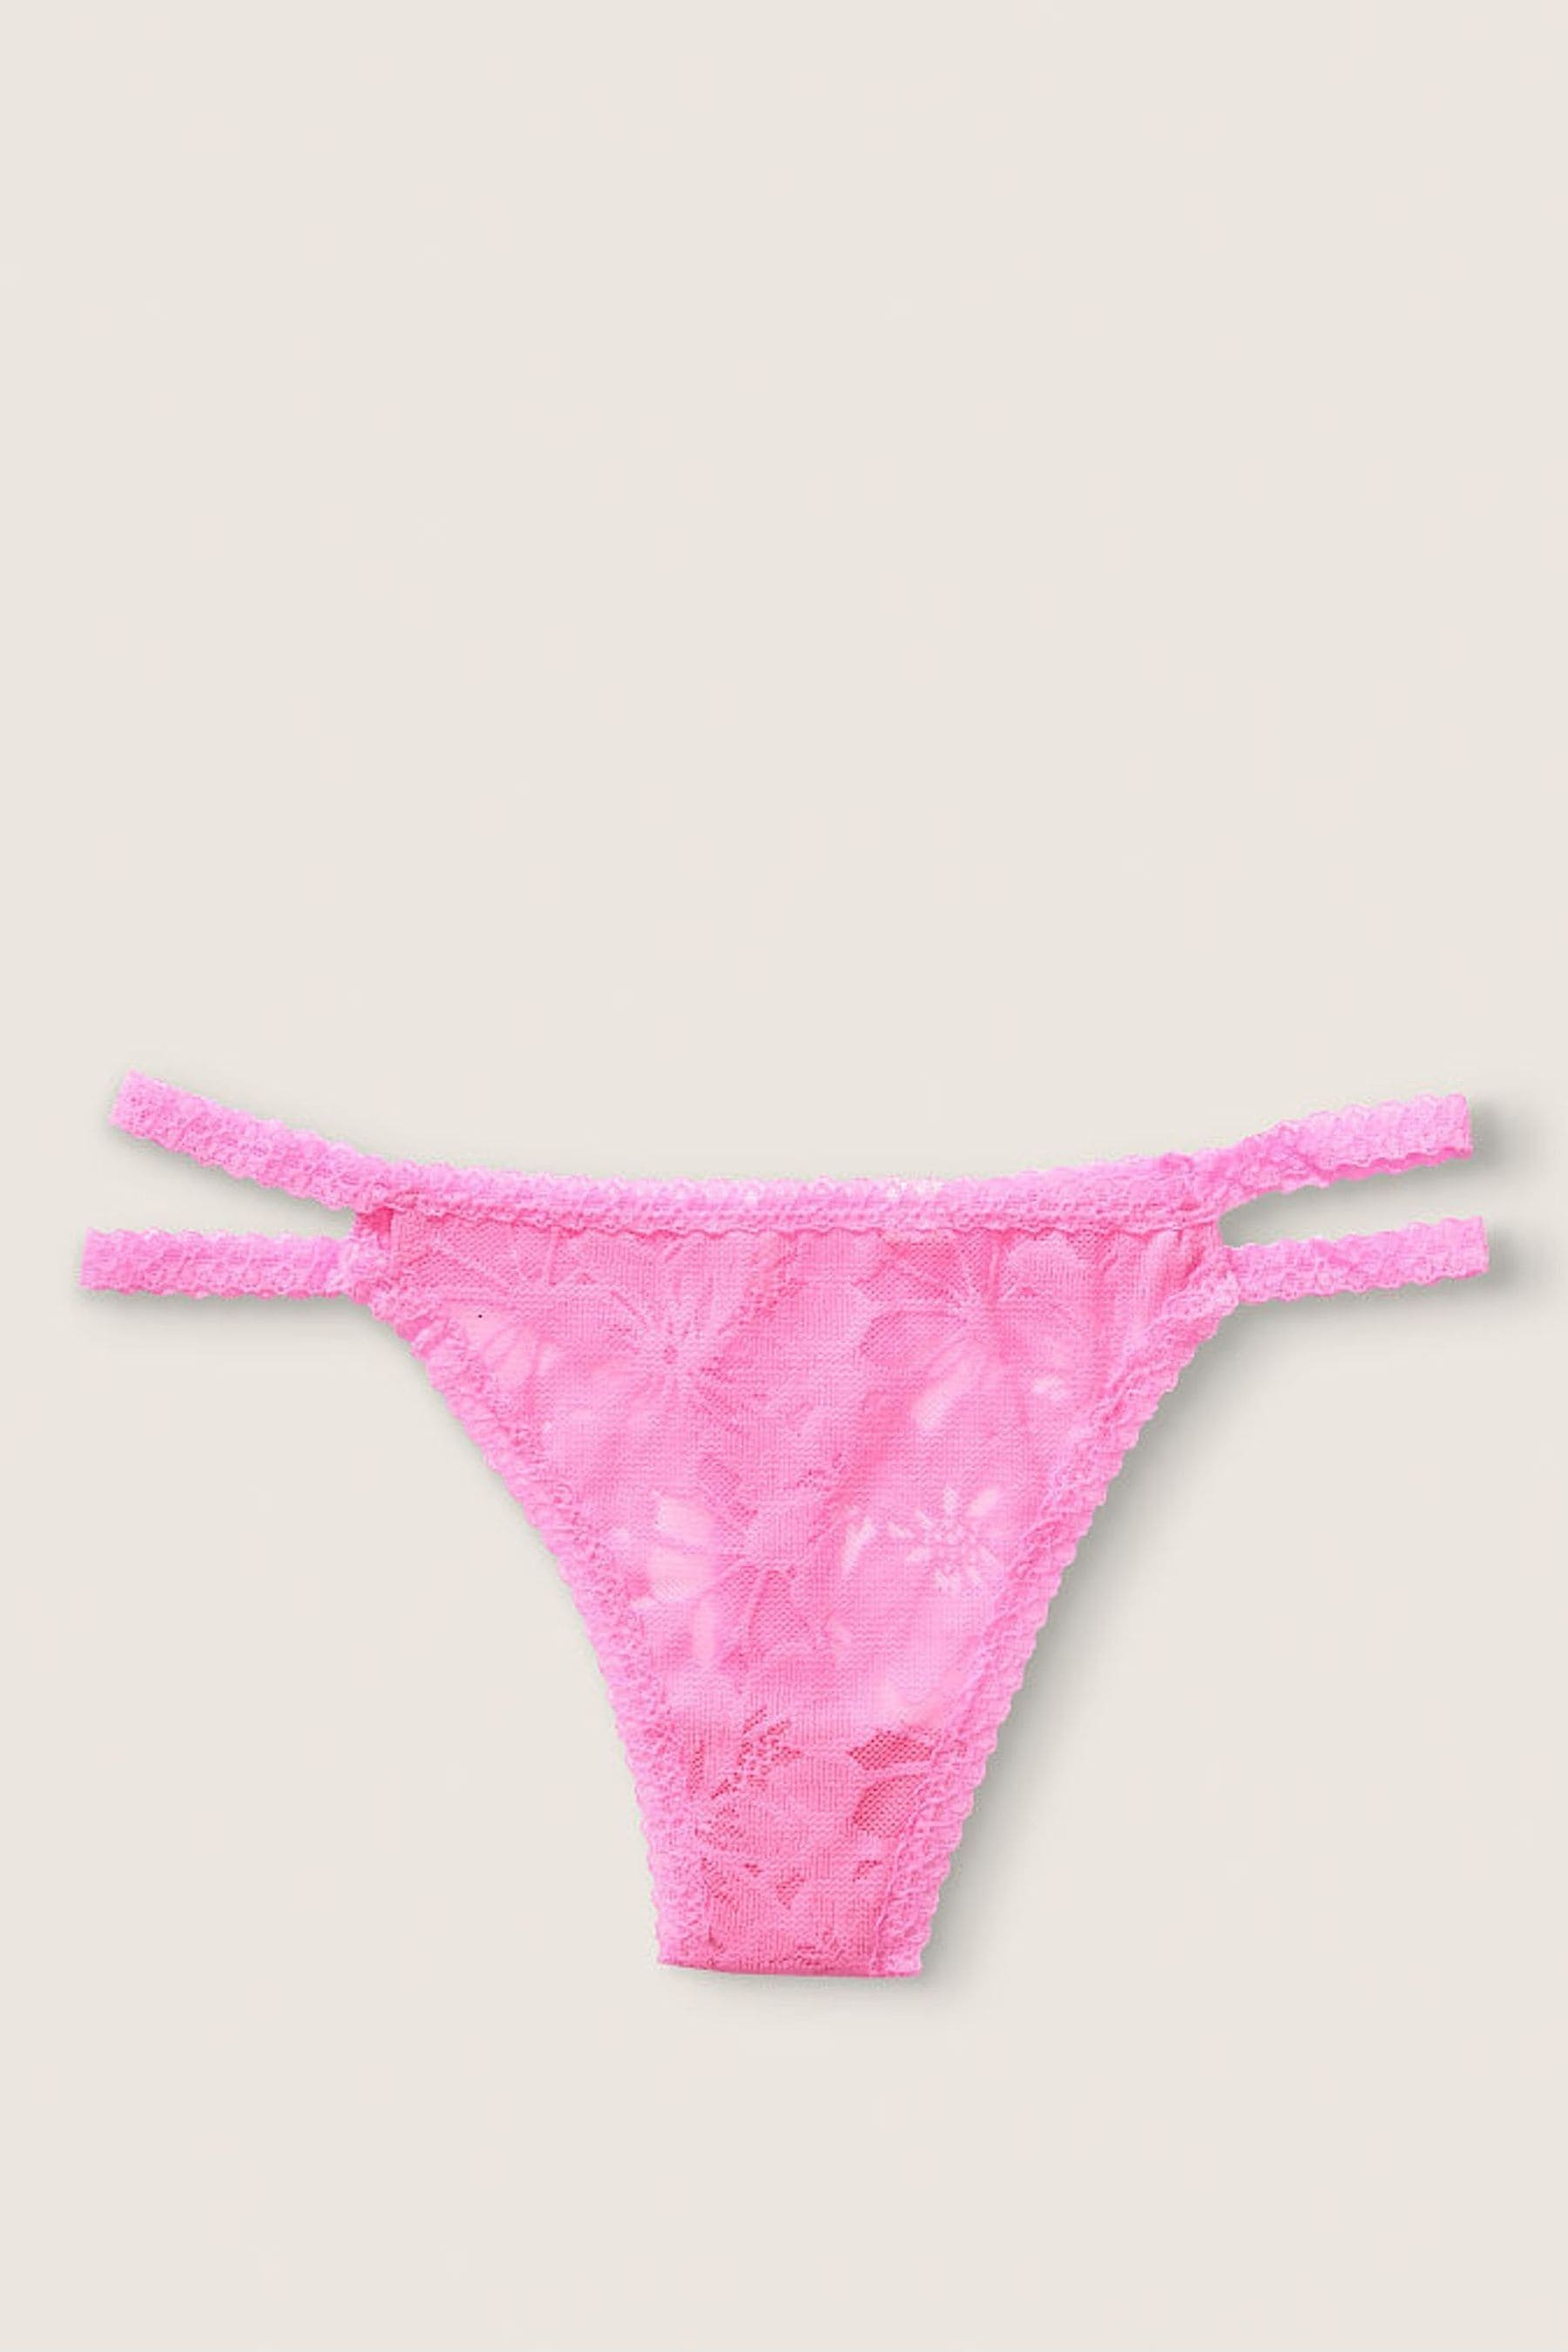 Buy Victoria S Secret Pink Lace Strappy Thong From The Victoria S Secret Uk Online Shop